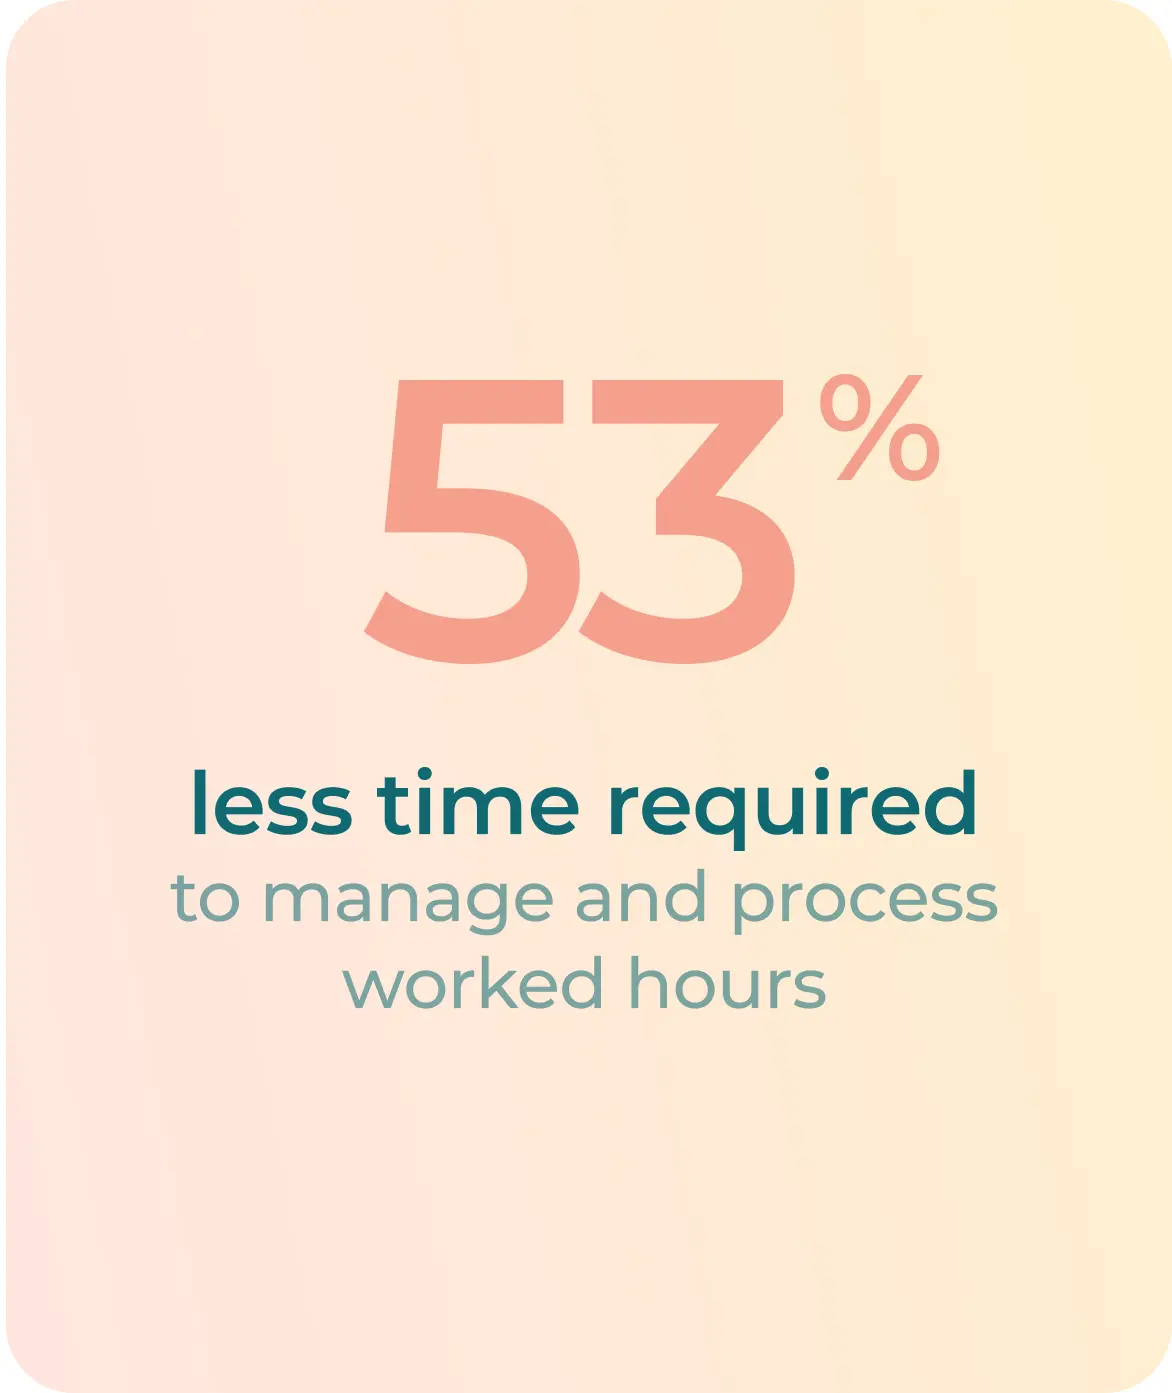 53% less time required to manage and process worked hours